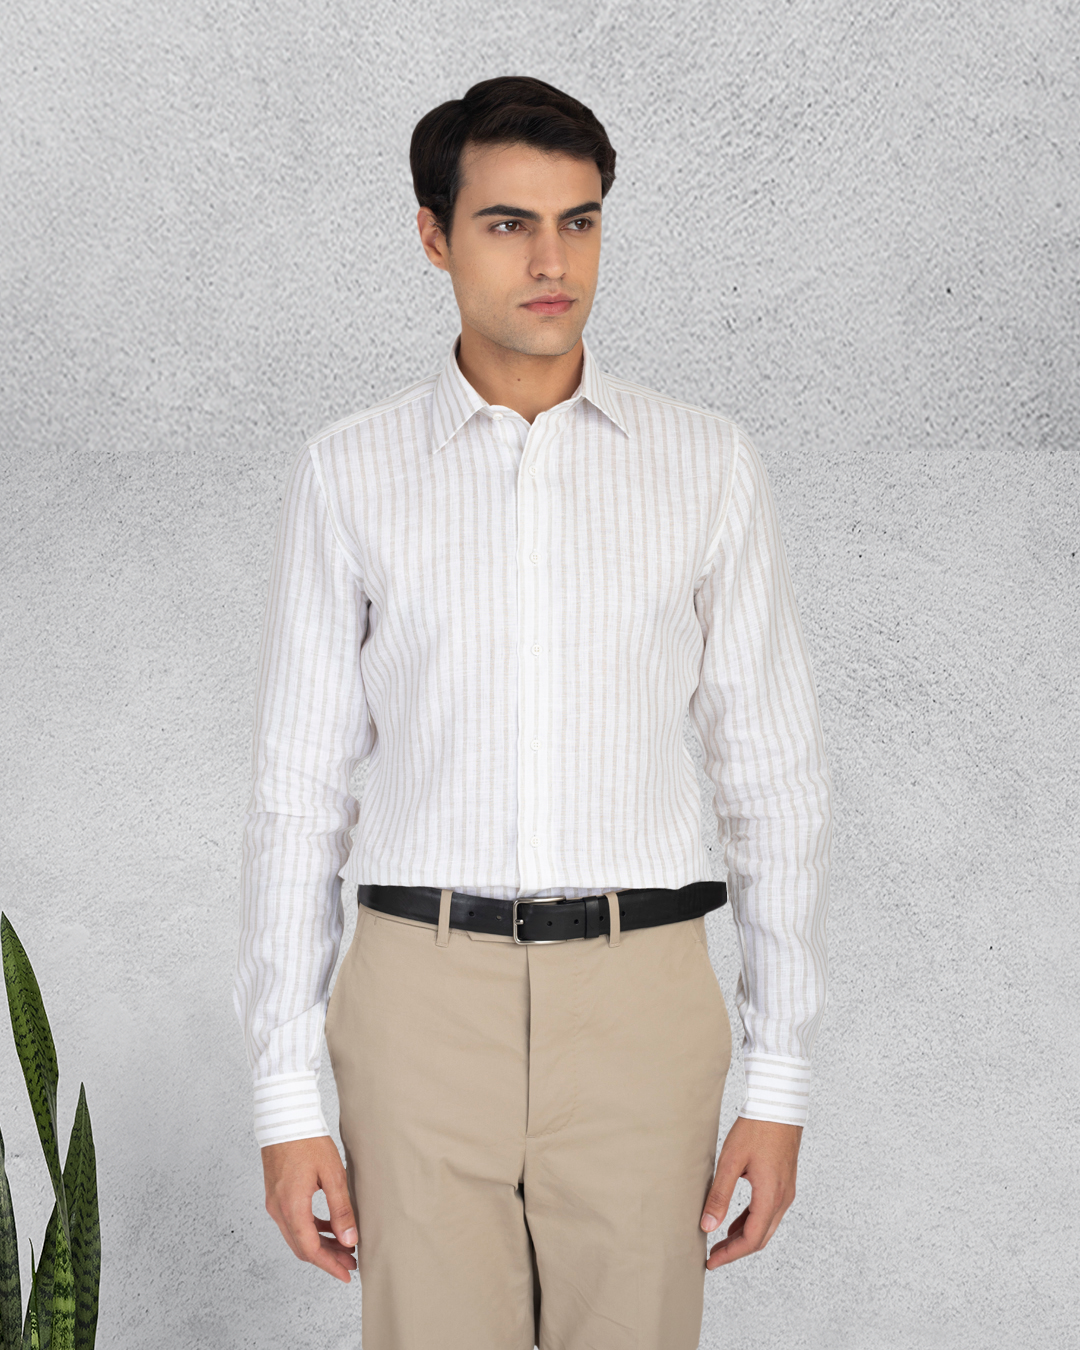 Model wearing the custom linen shirt for men in white with ecru stripes by Luxire Clothing